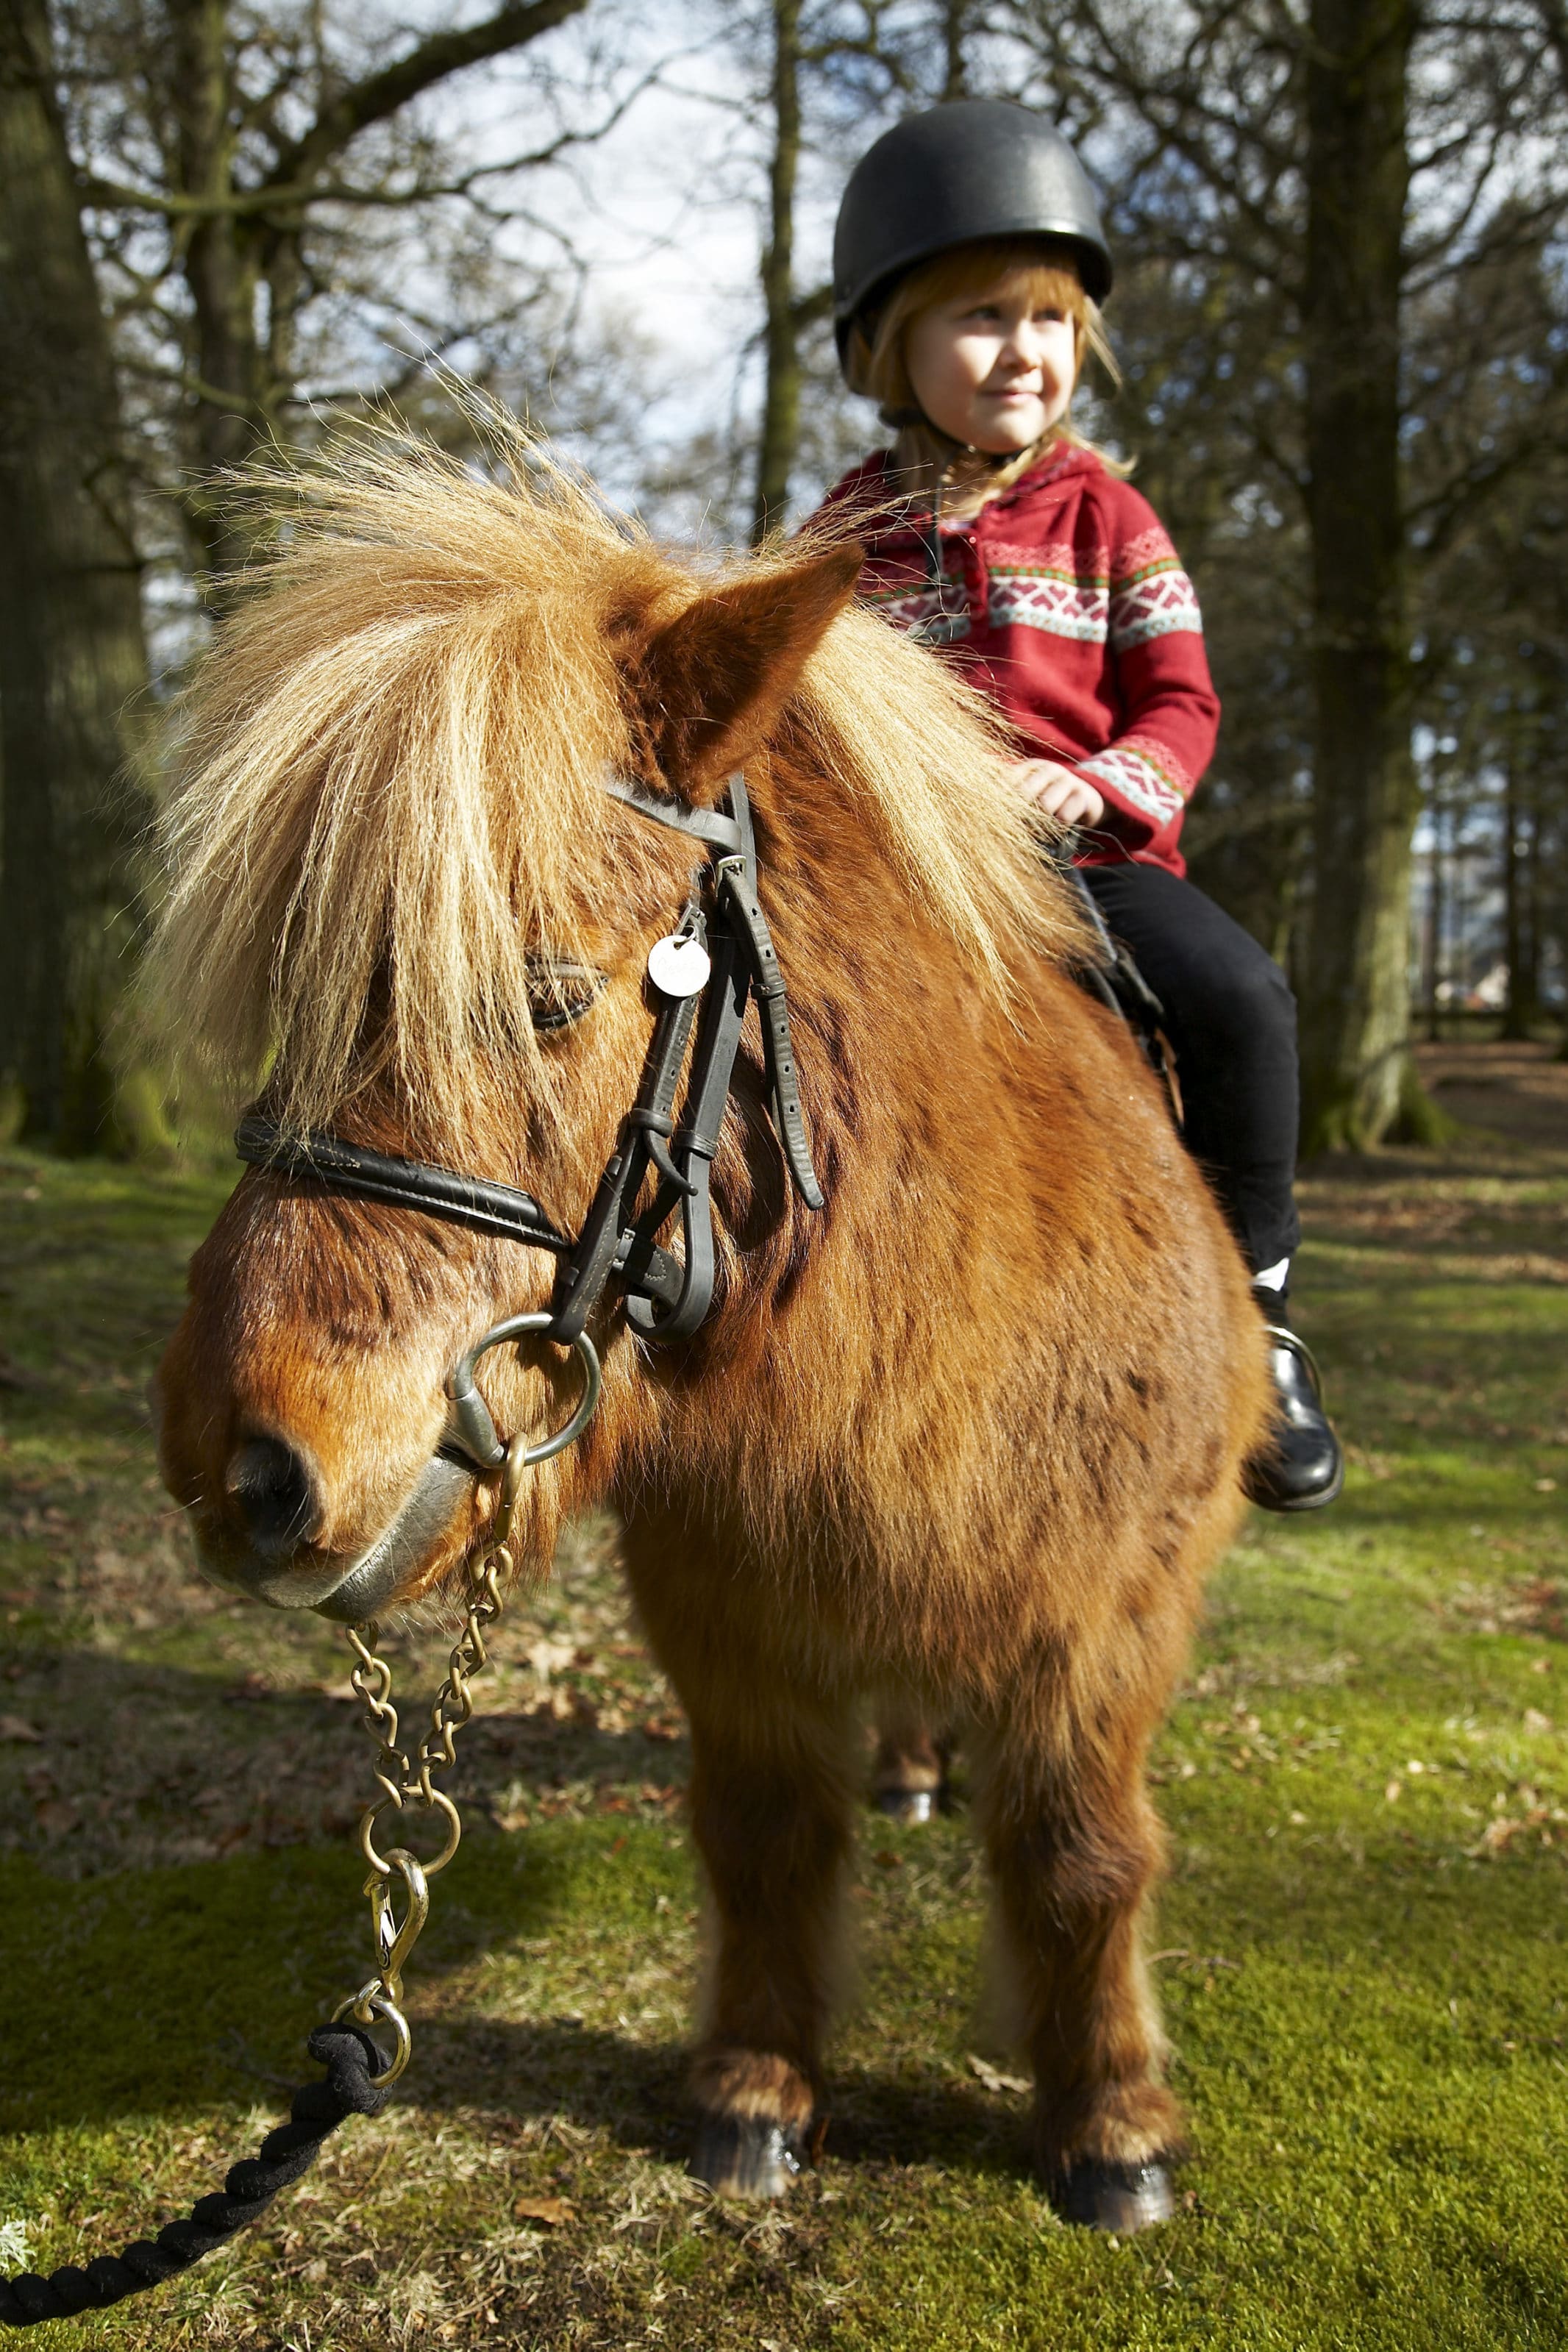 Kids can get their first taste of pony trekking at Gleneagles